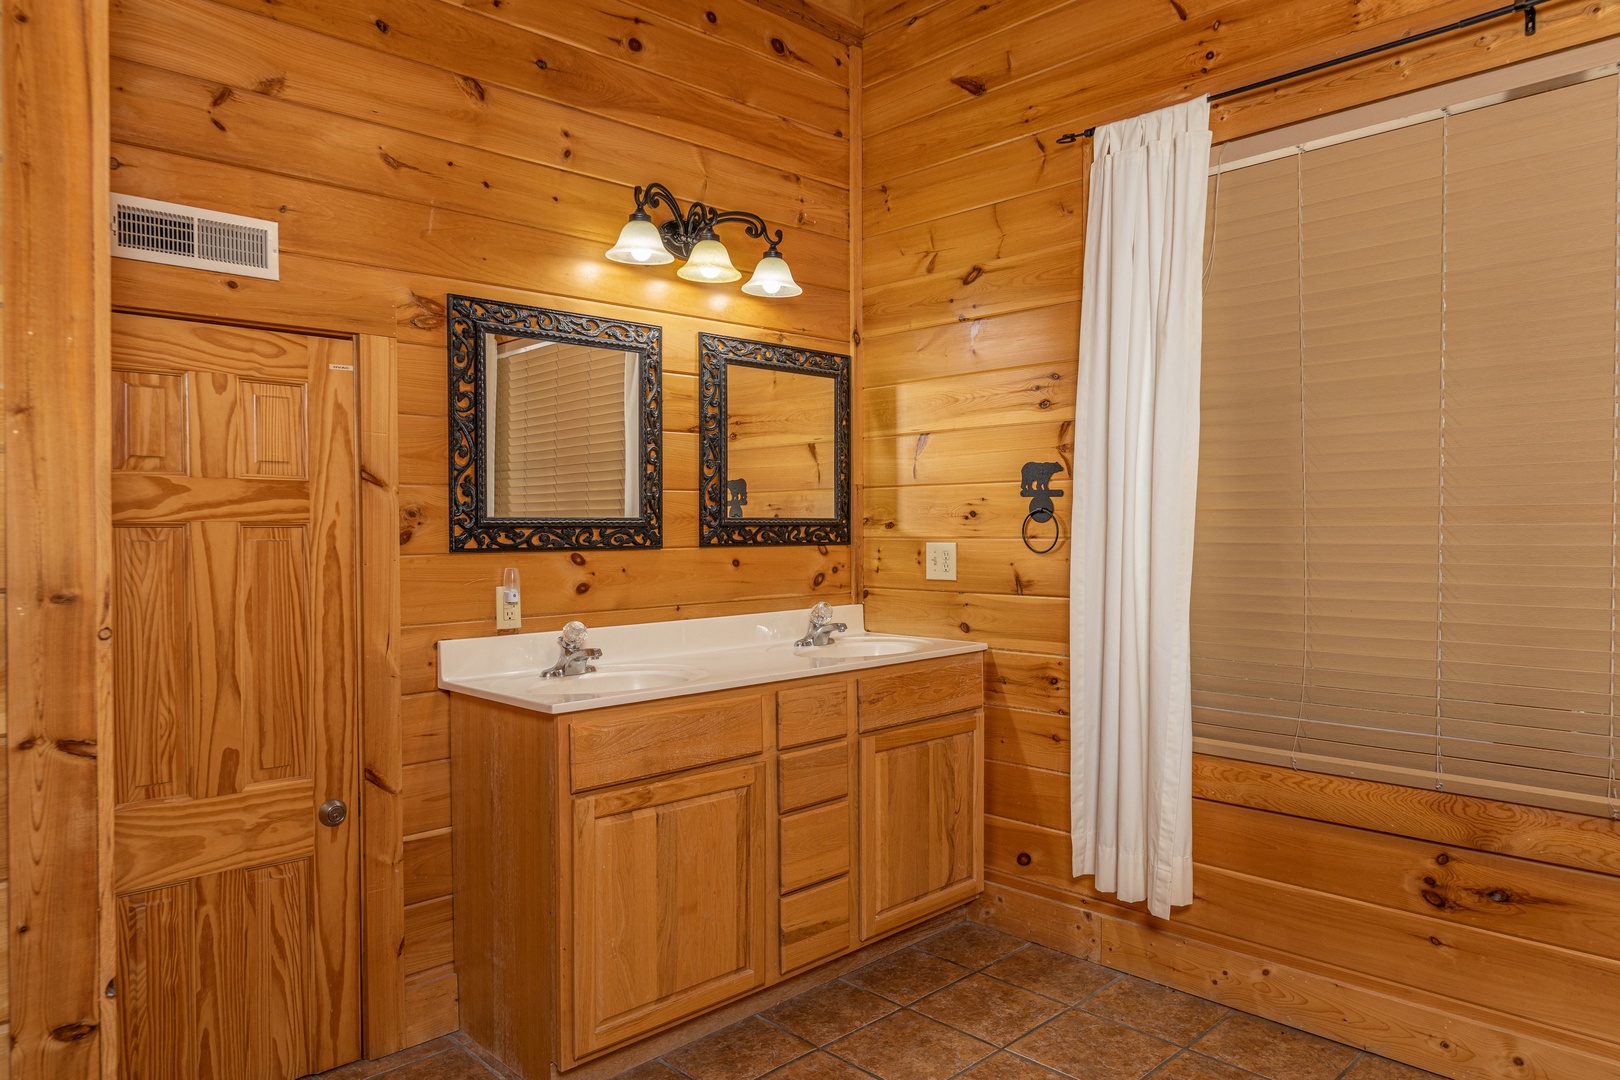 Double vanity at Bears Don't Bluff, a 3 bedroom cabin rental located in Pigeon Forge